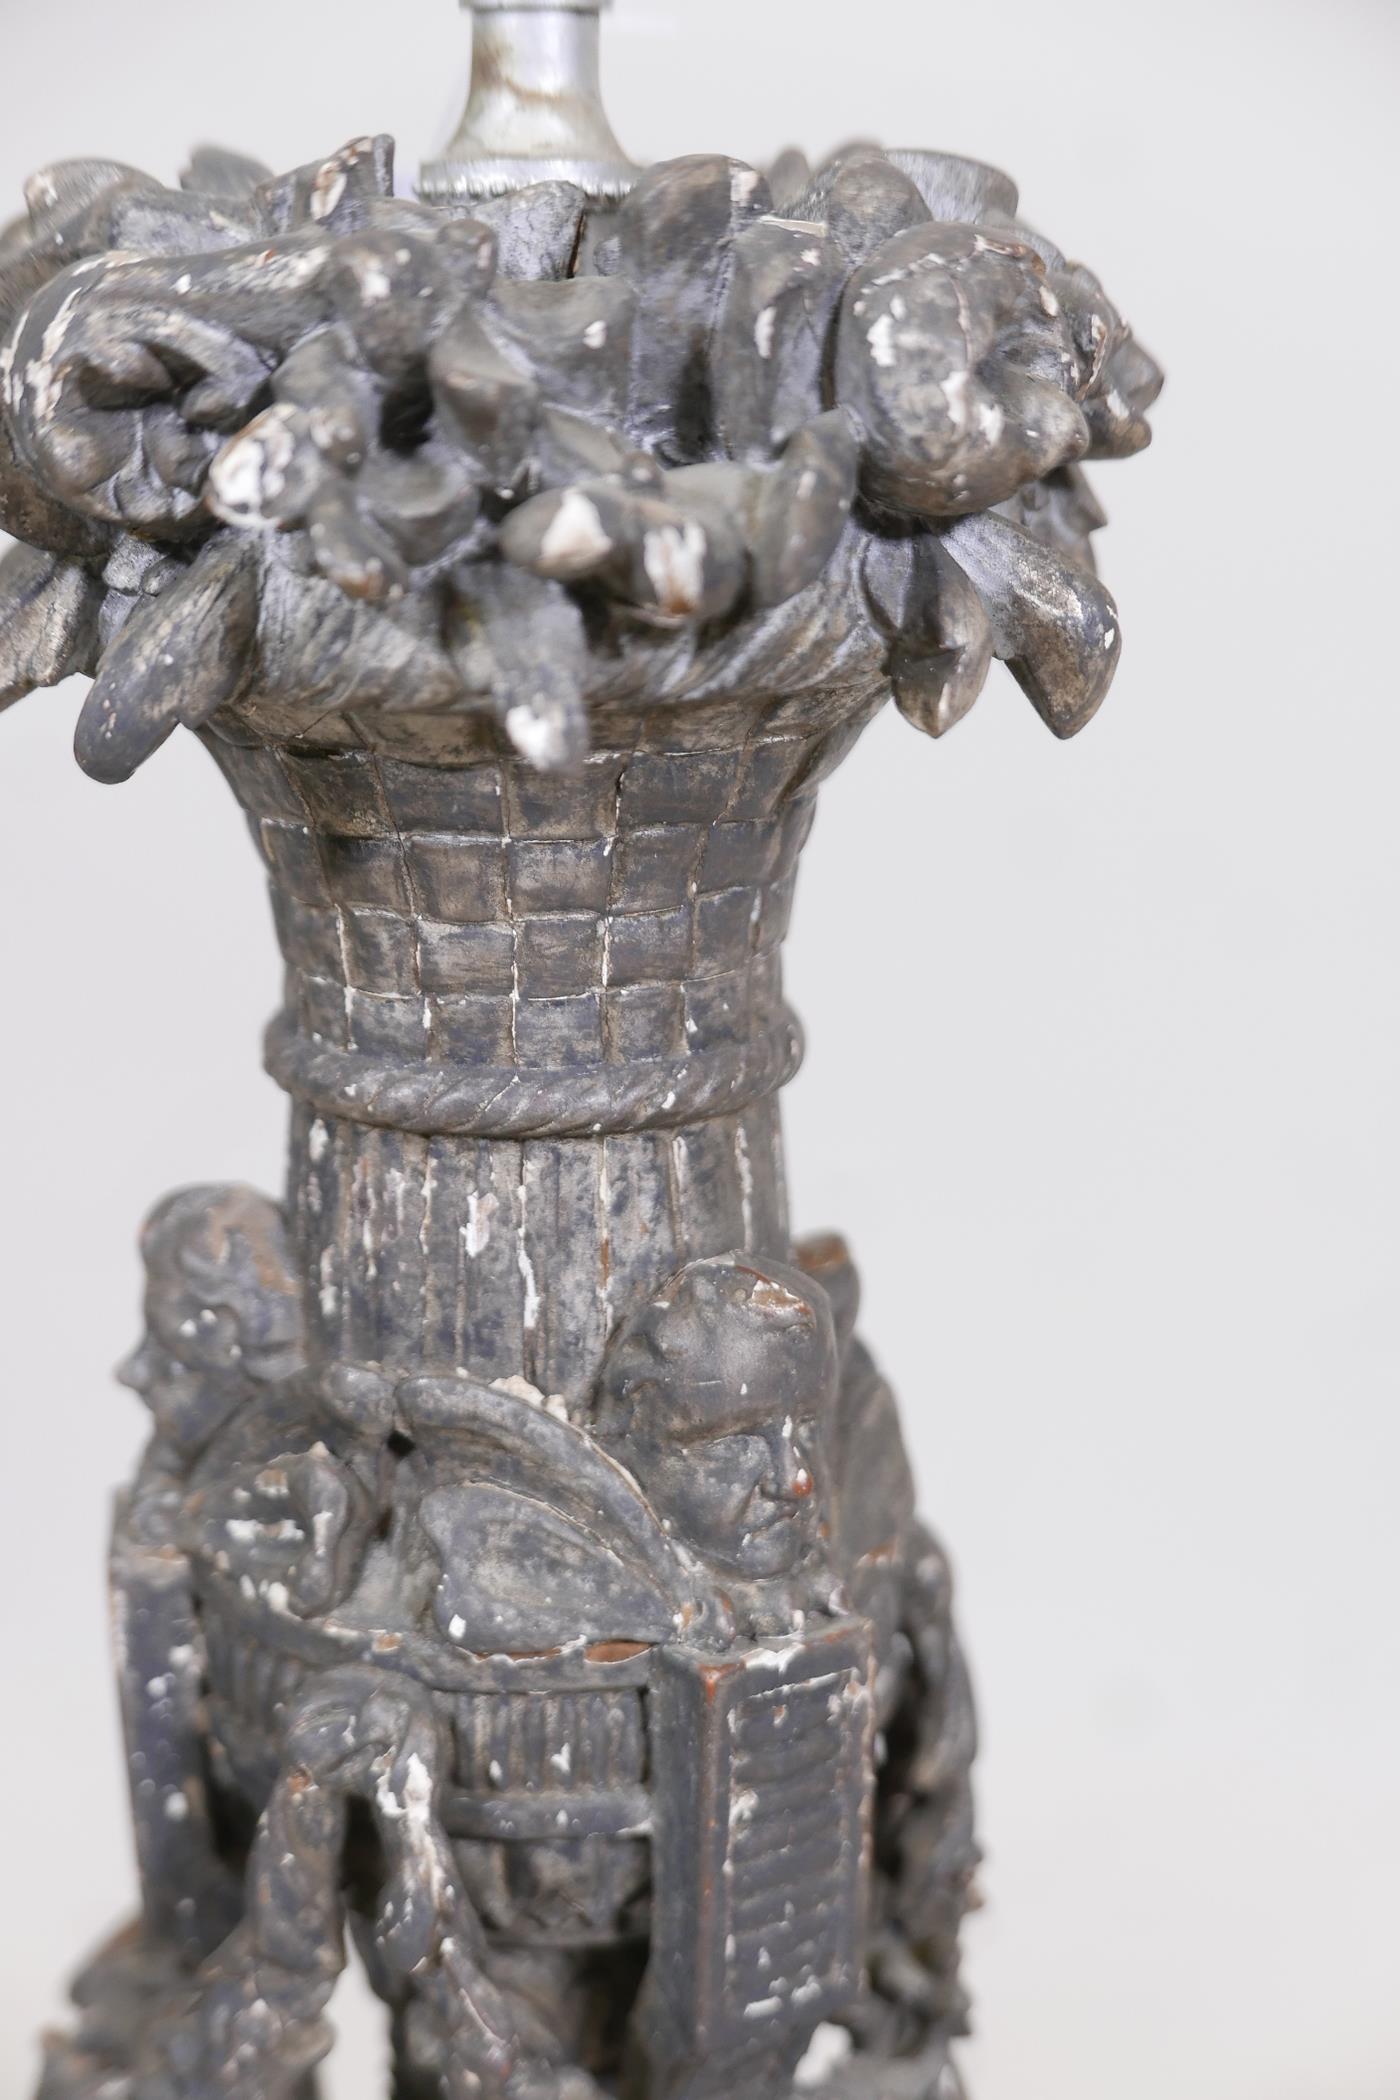 A C19th wood table lamp, well carved with floral swags and winged putti, drilled for electricity, - Image 2 of 4